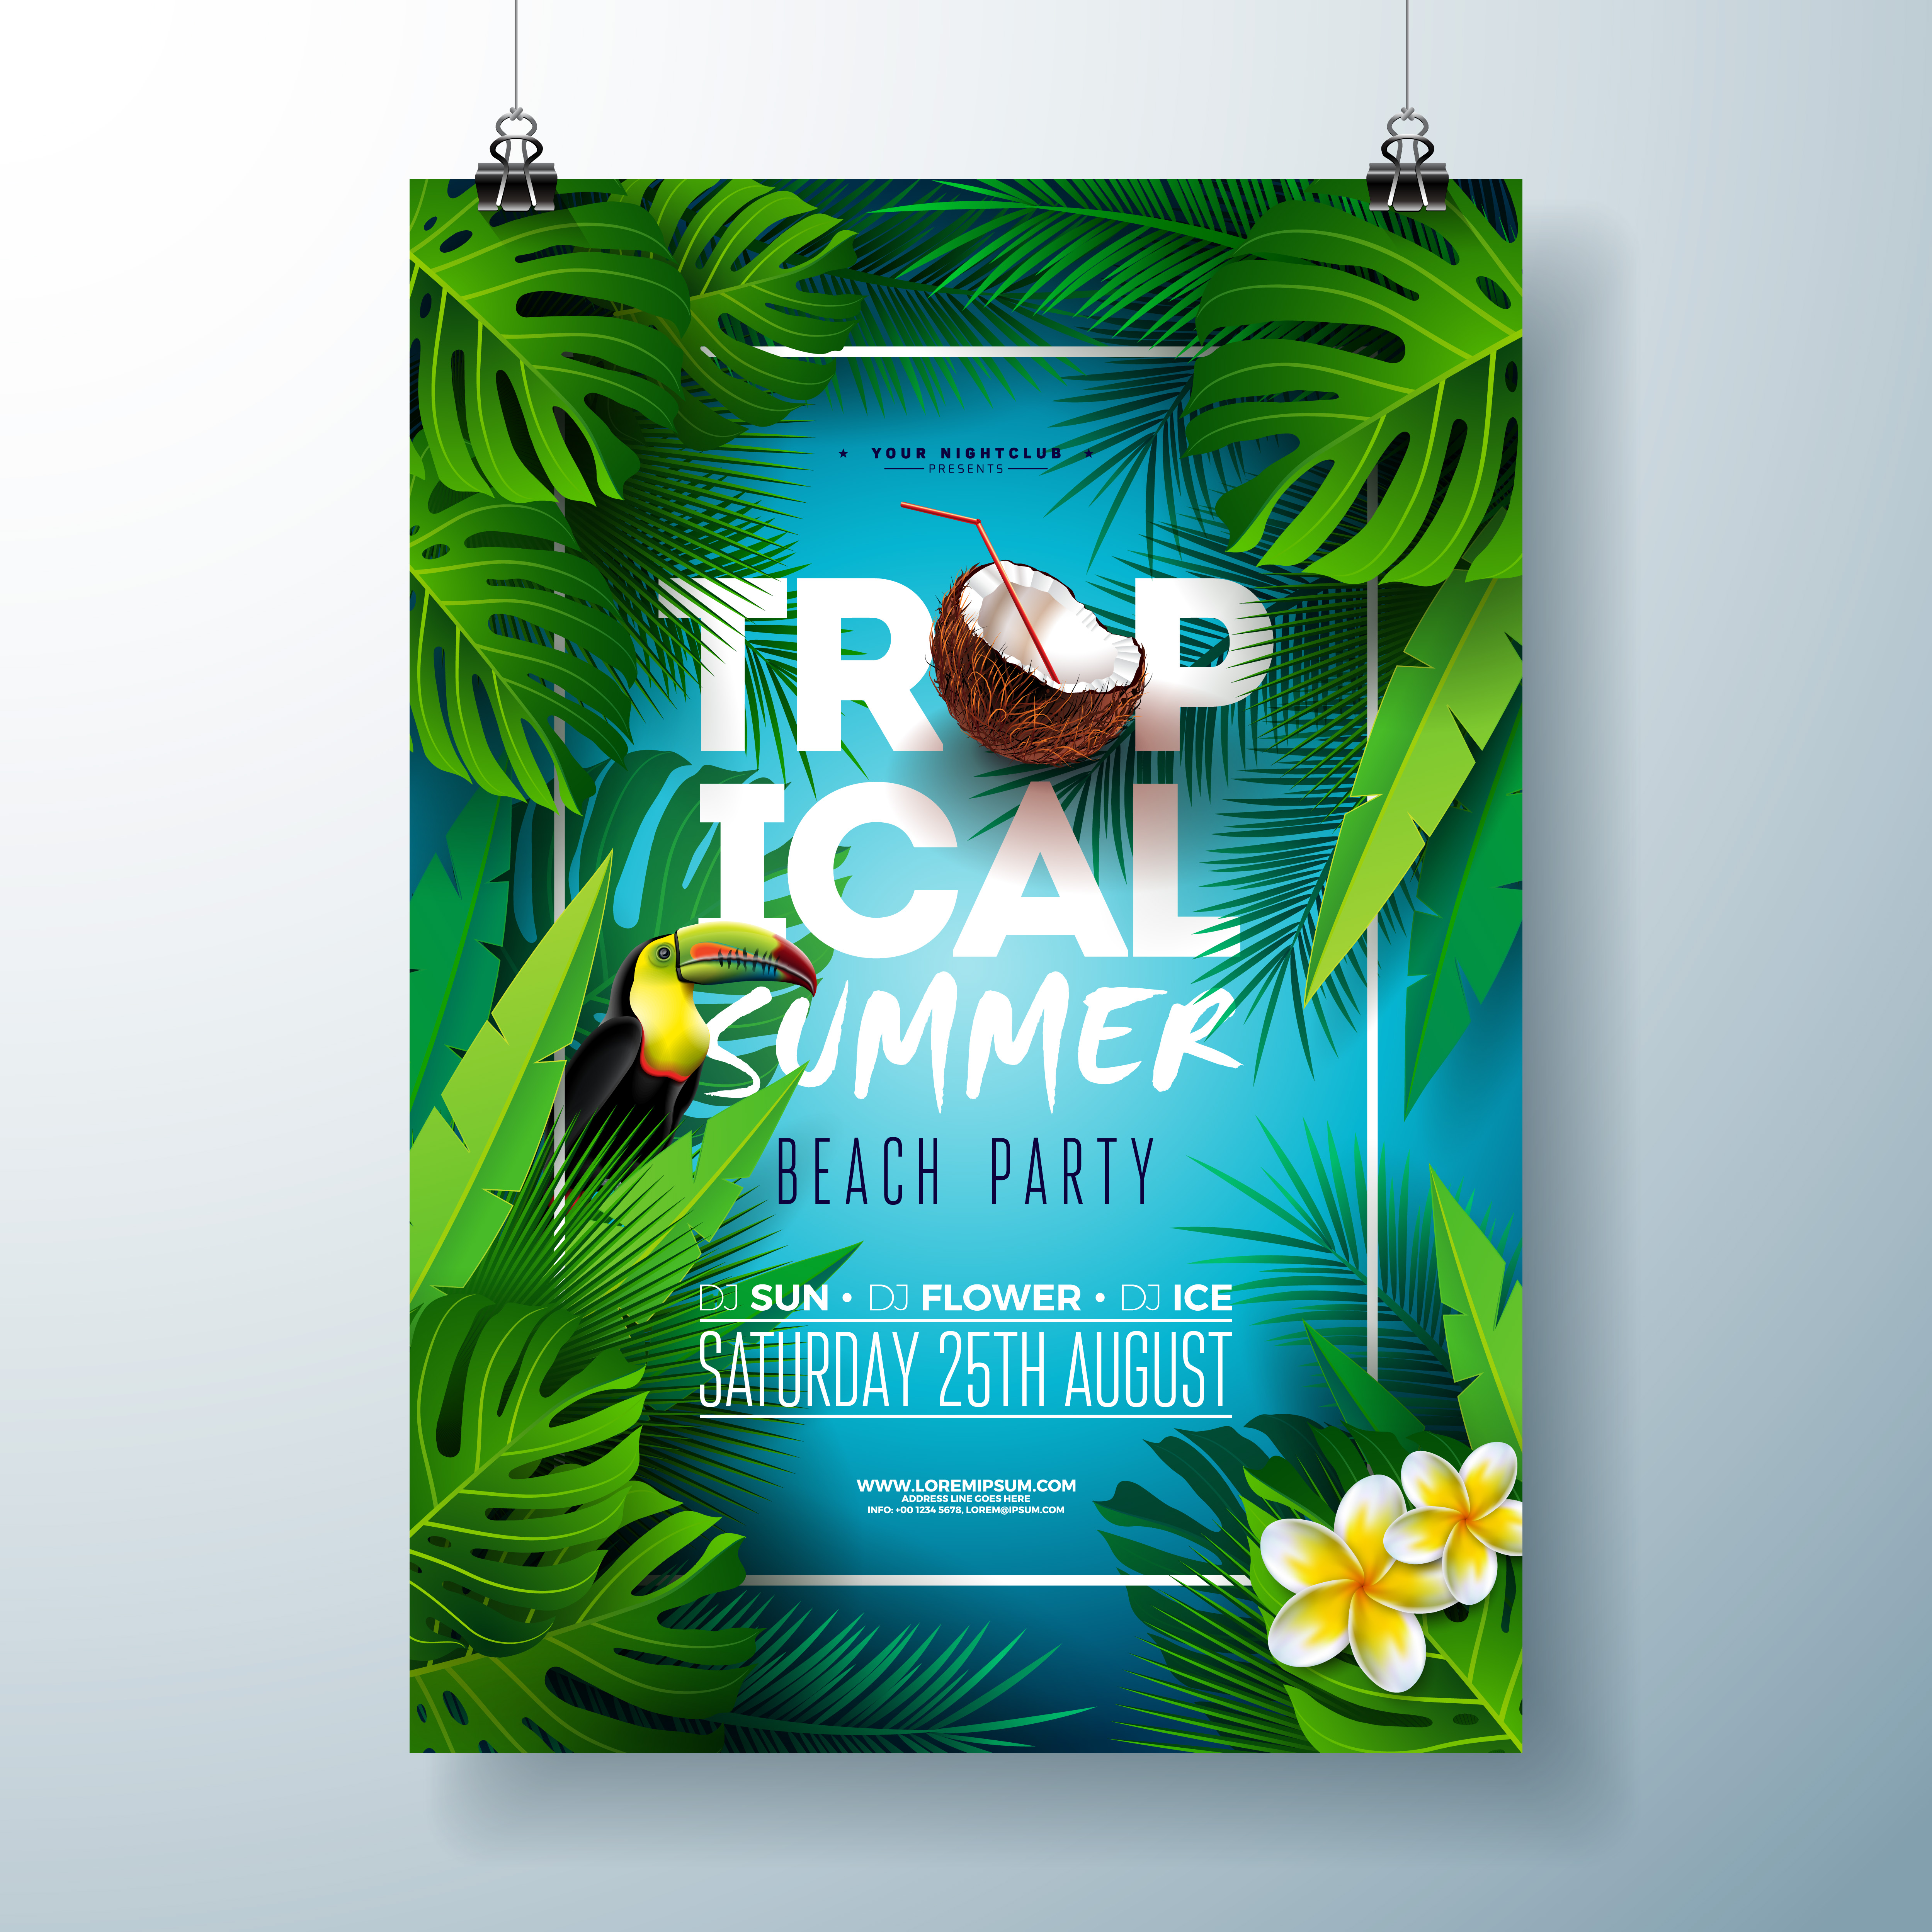 Tropical Summer Beach Party Flyer Design With Flower Coconut Palm Leaves And Toucan Bird On Blue Background Vector Summer Celebration Design Template With Nature Floral Elements Download Free Vectors Clipart Graphics